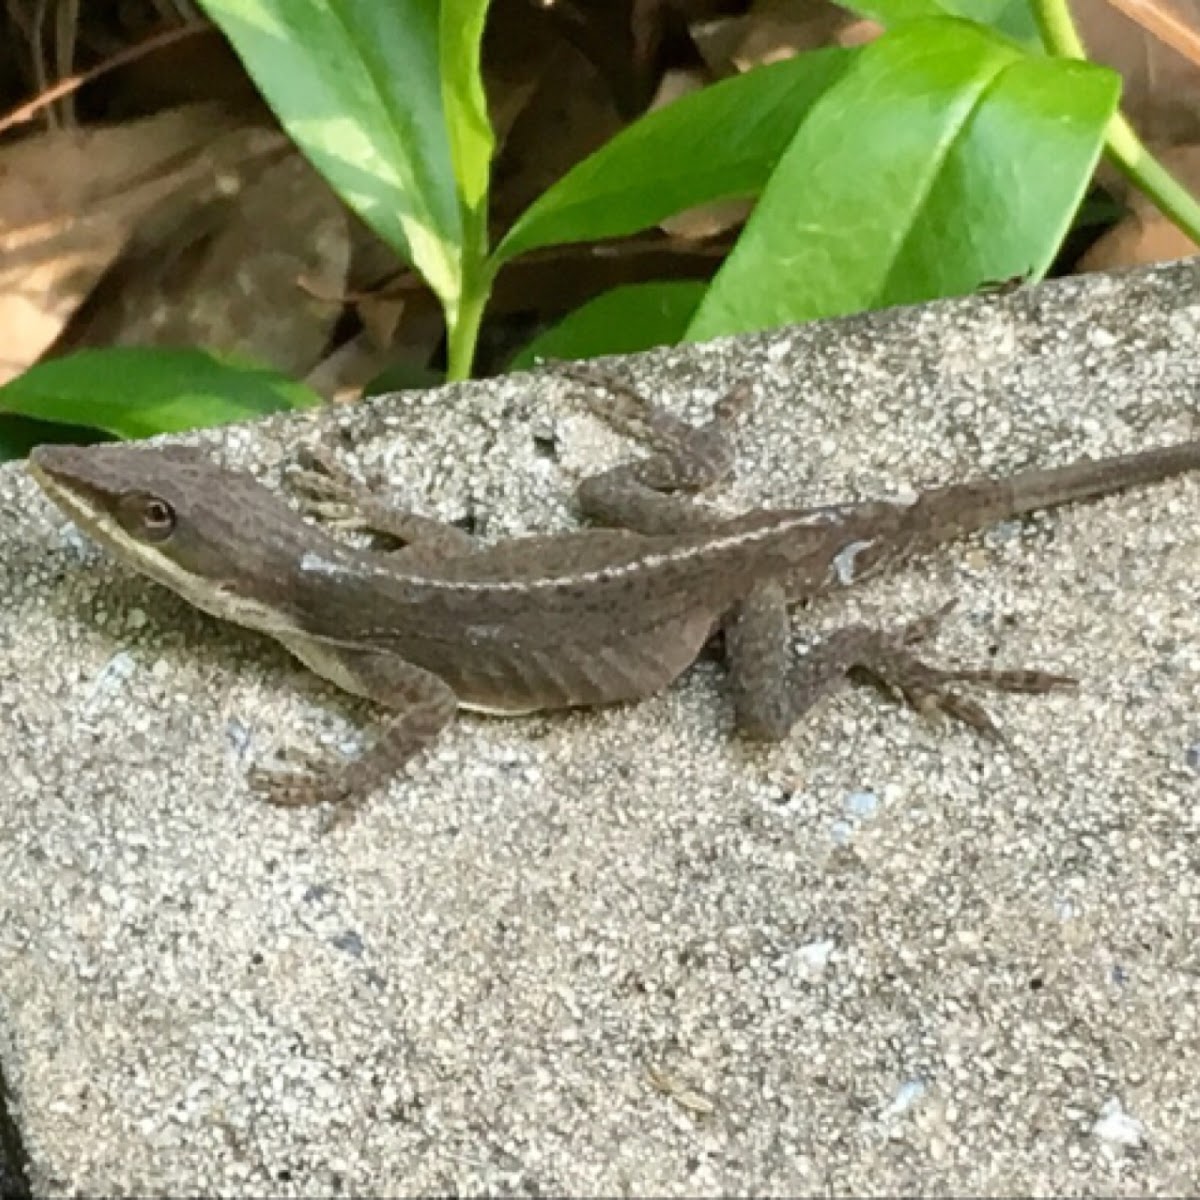 Green Anole - female